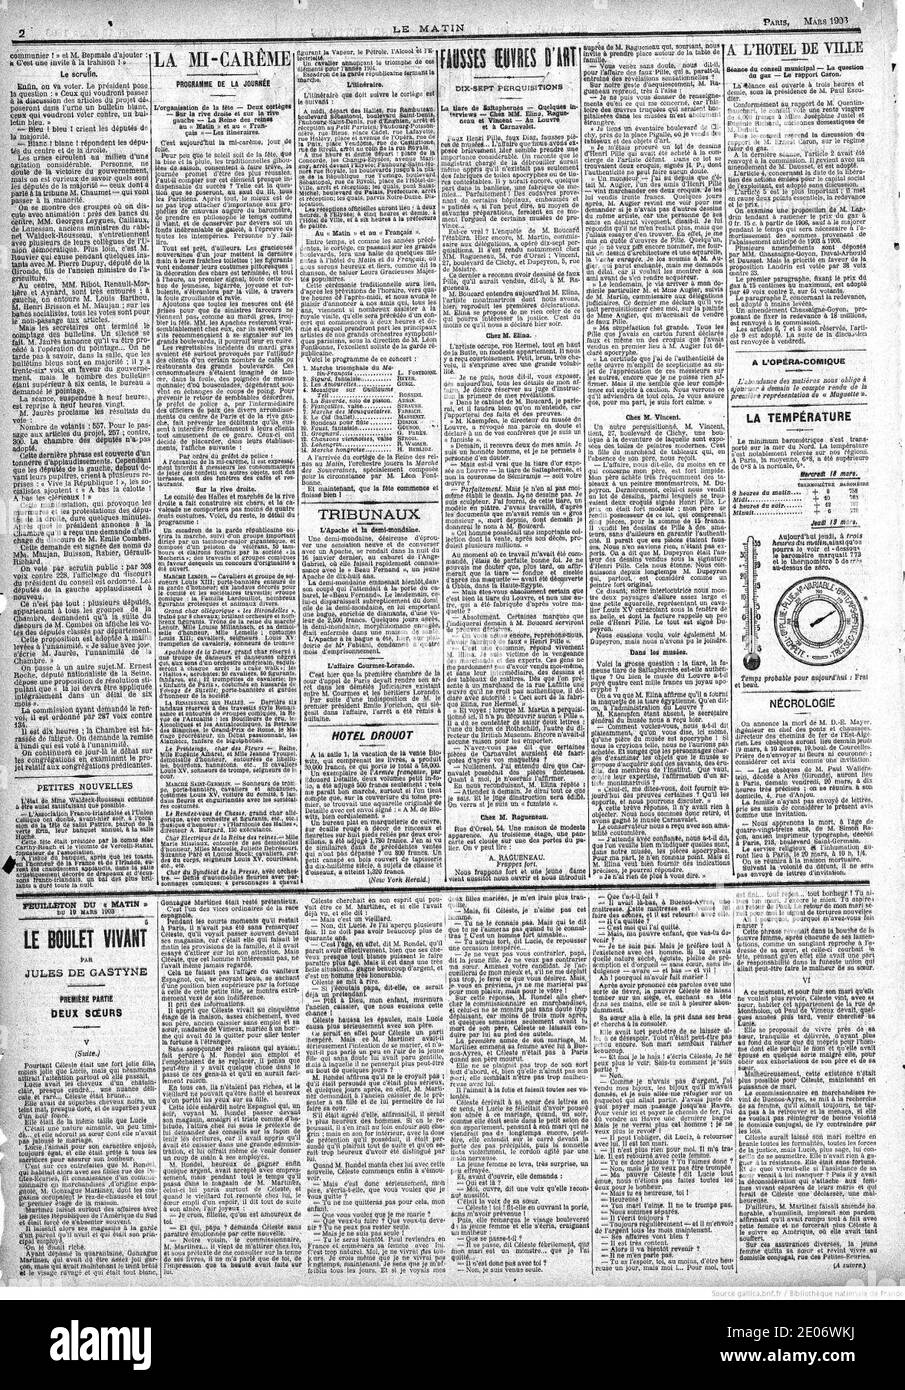 Le Matin - 19 march 1903, page 2. Stock Photo